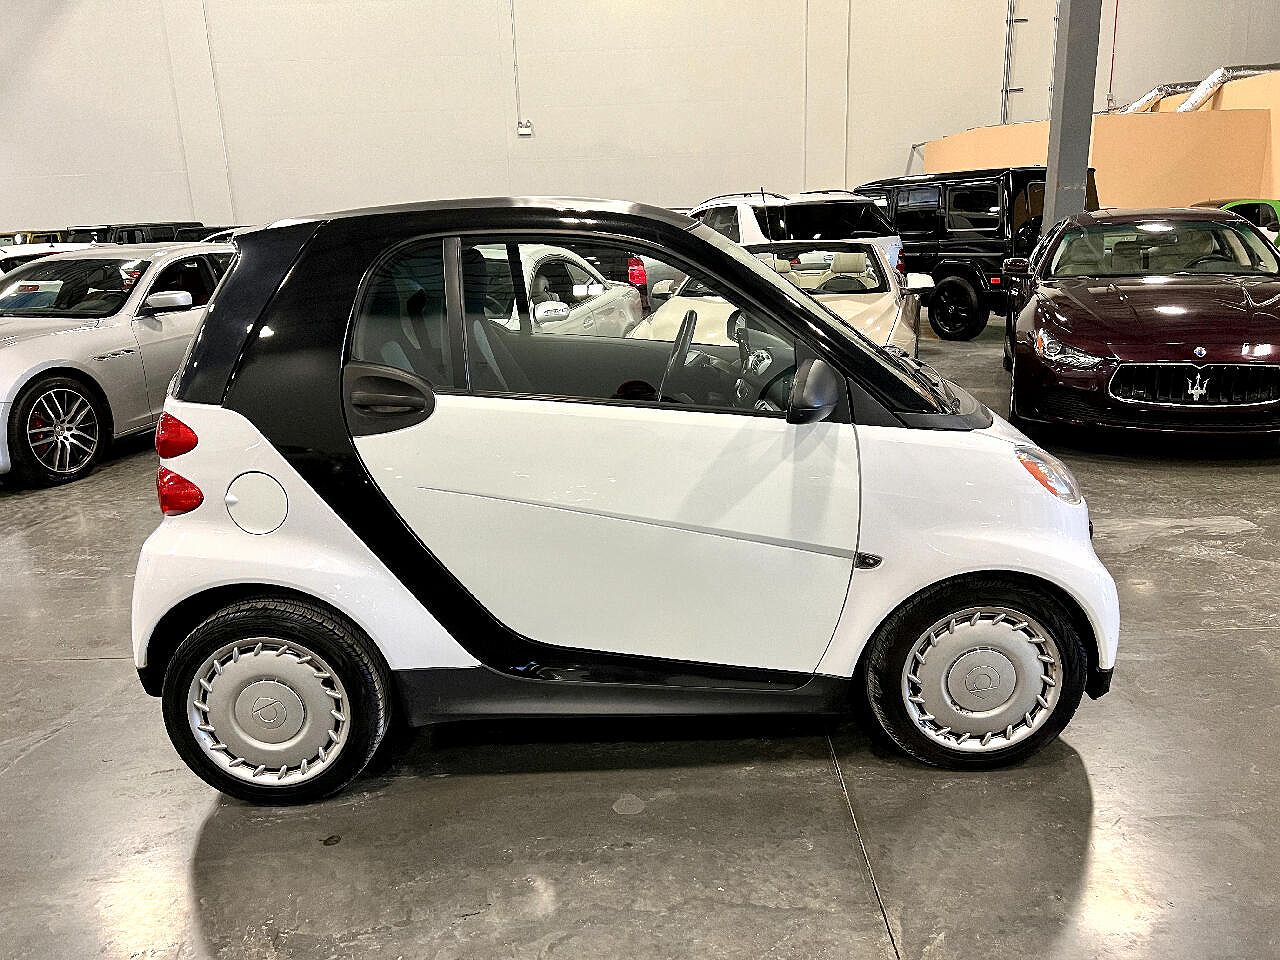 2015 Smart Fortwo Passion image 8